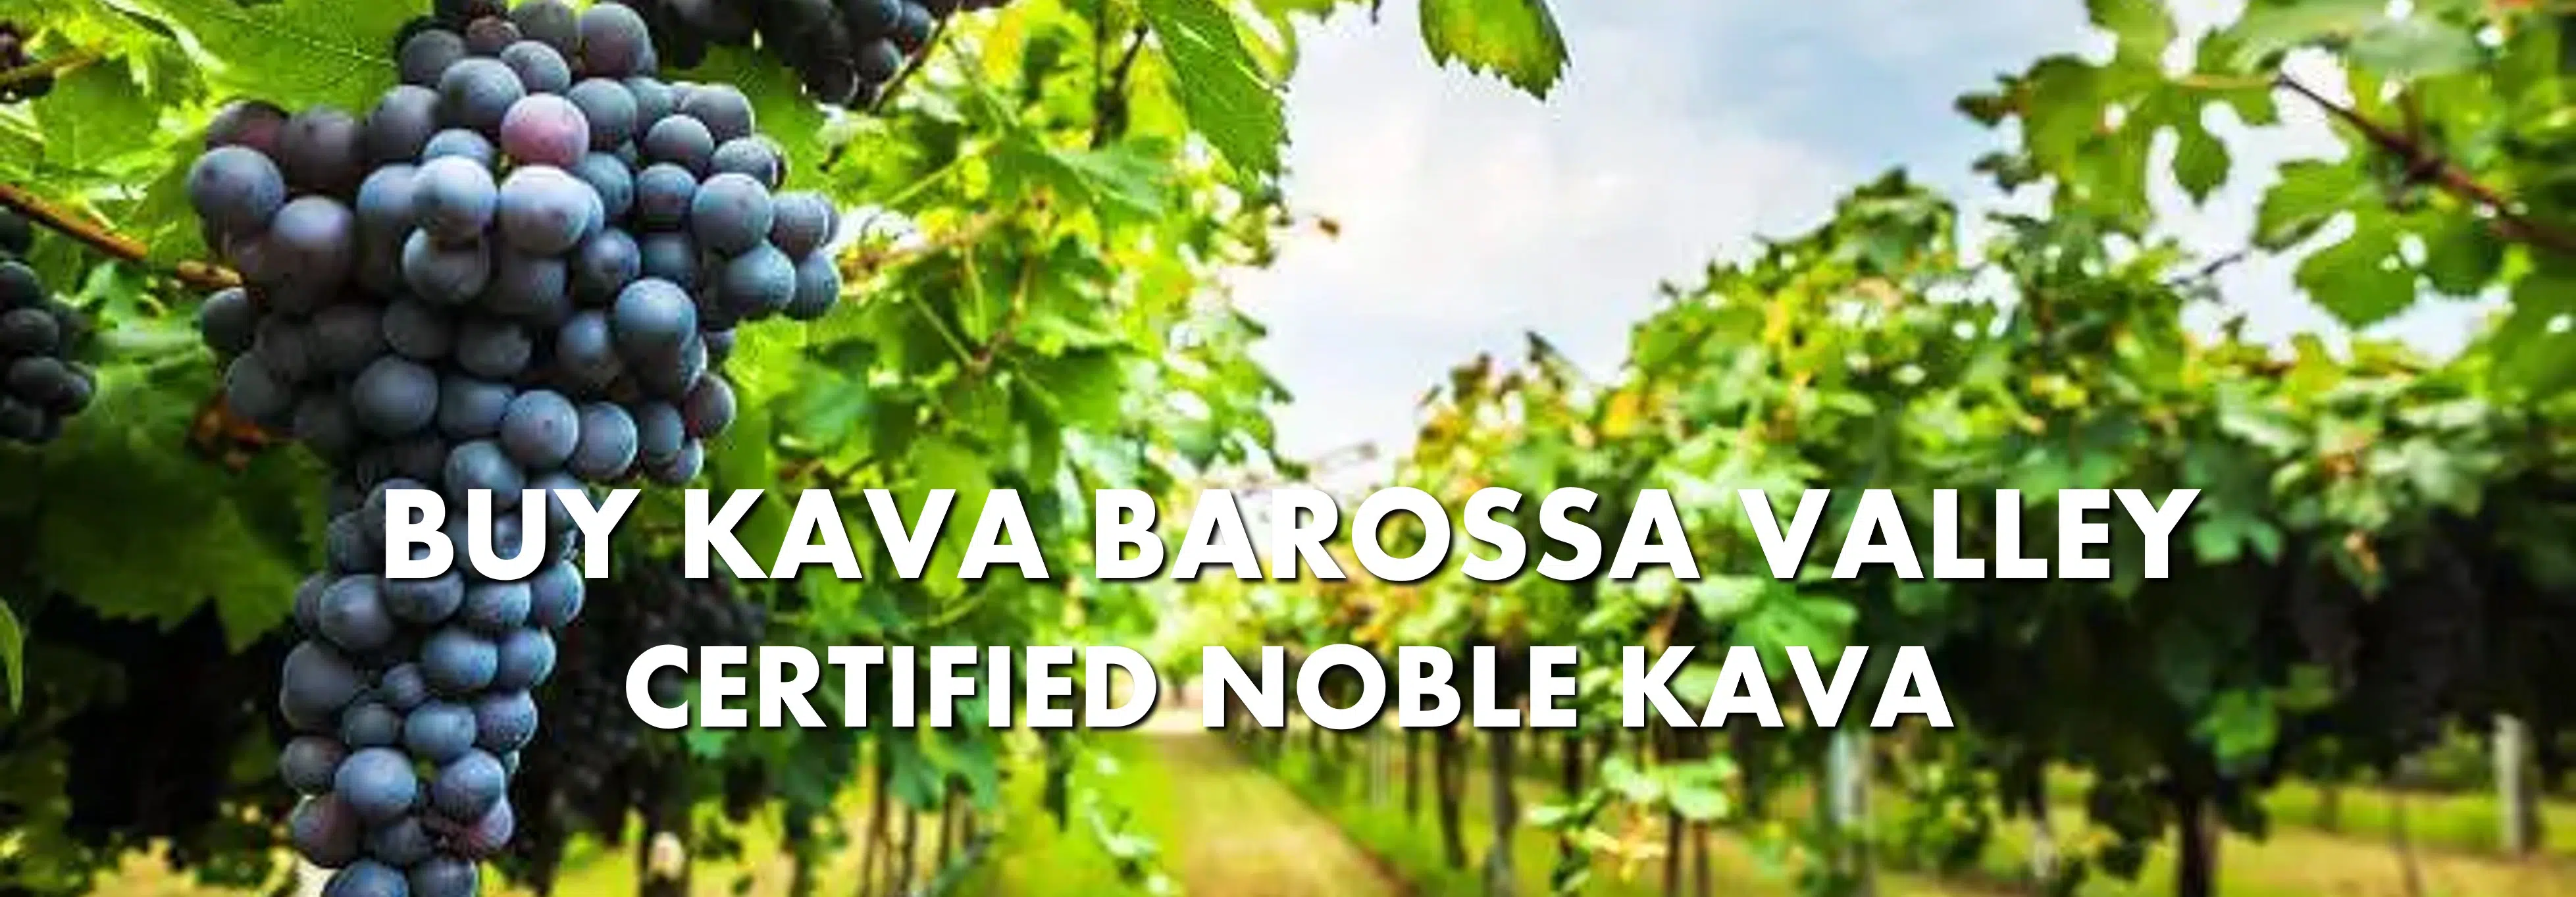 Grapes on vines in Barossa Valley South Australia with caption Buy Kava Barossa Valley Certified Noble Kava